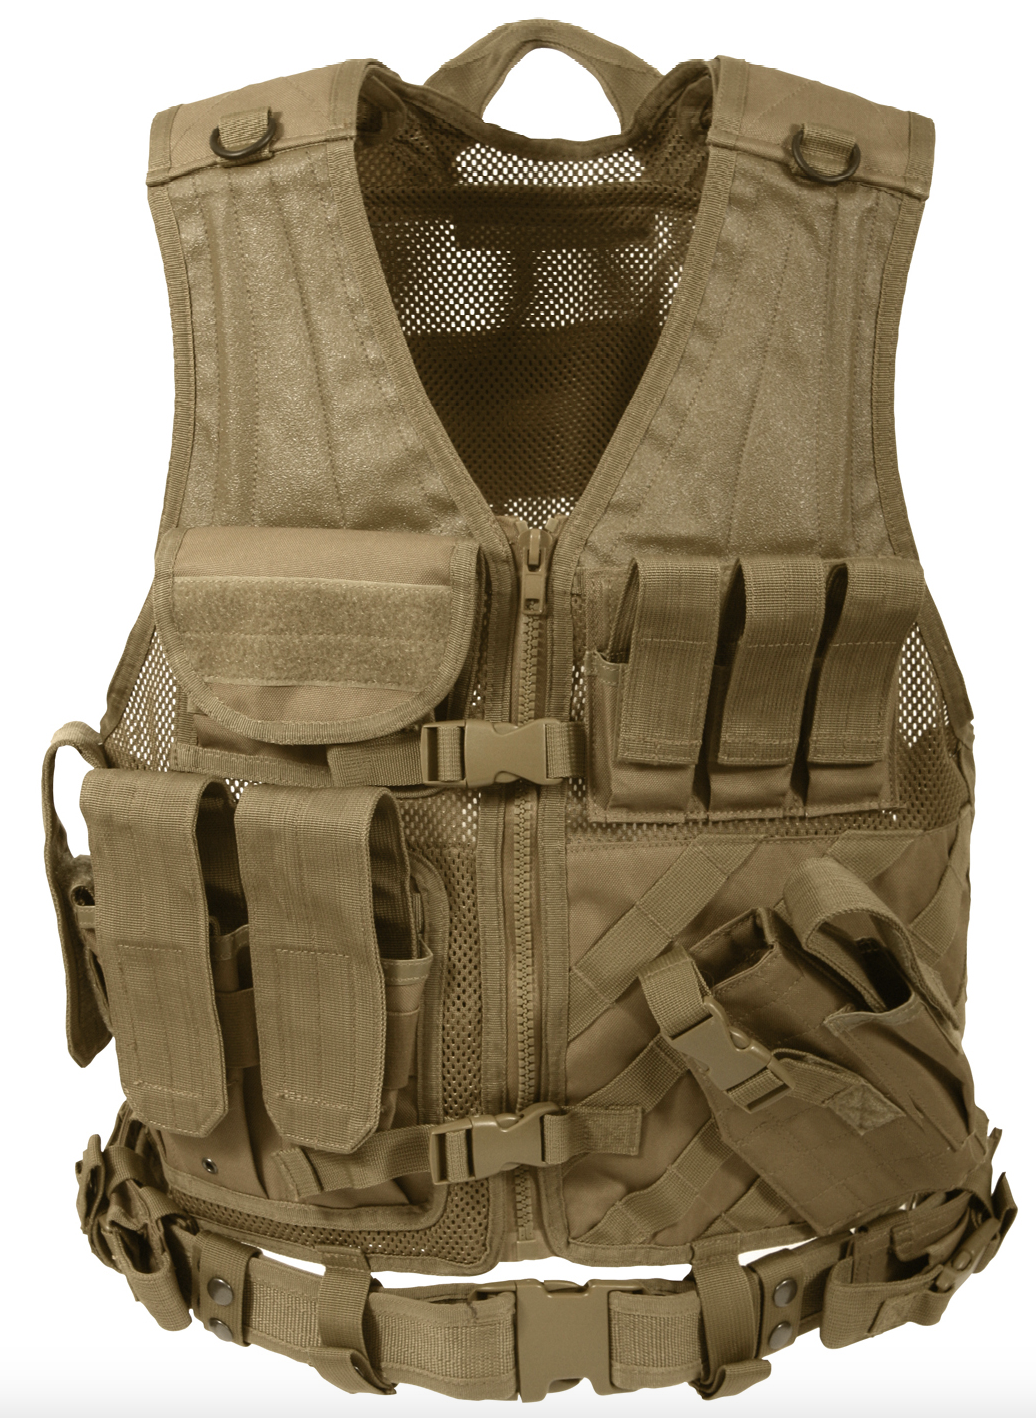 02 Caution Tape Phone Holster Tactical Vest For Sale 